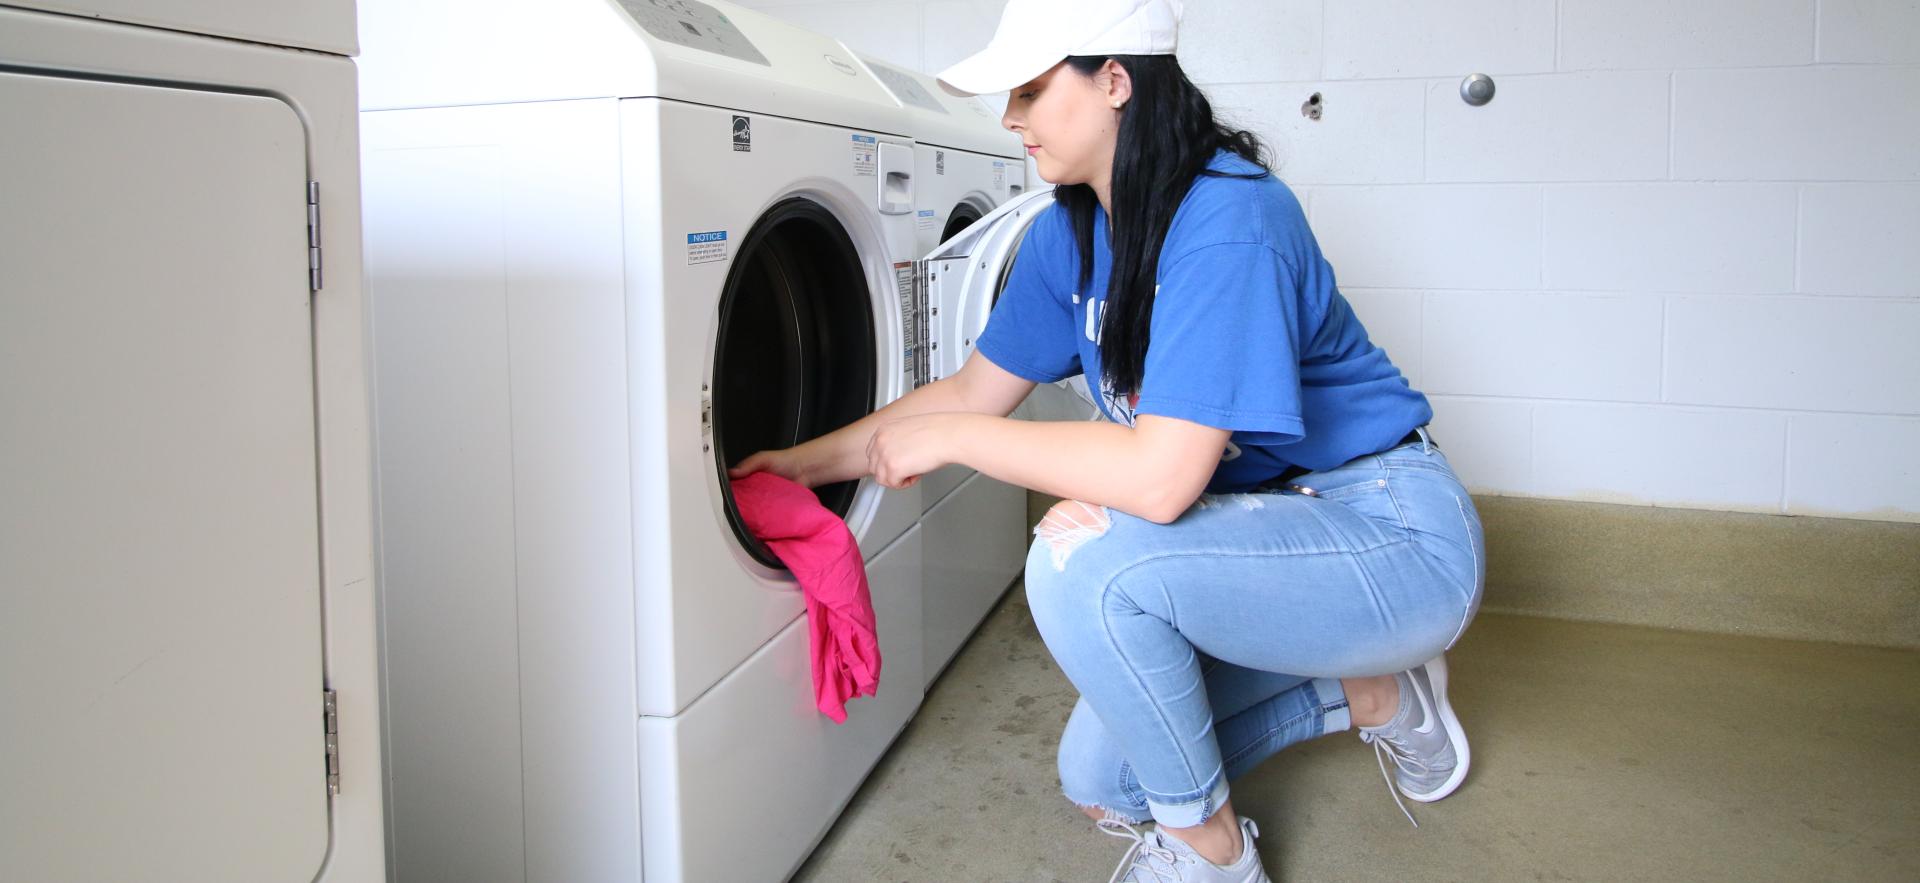 student putting clothes into washing machine